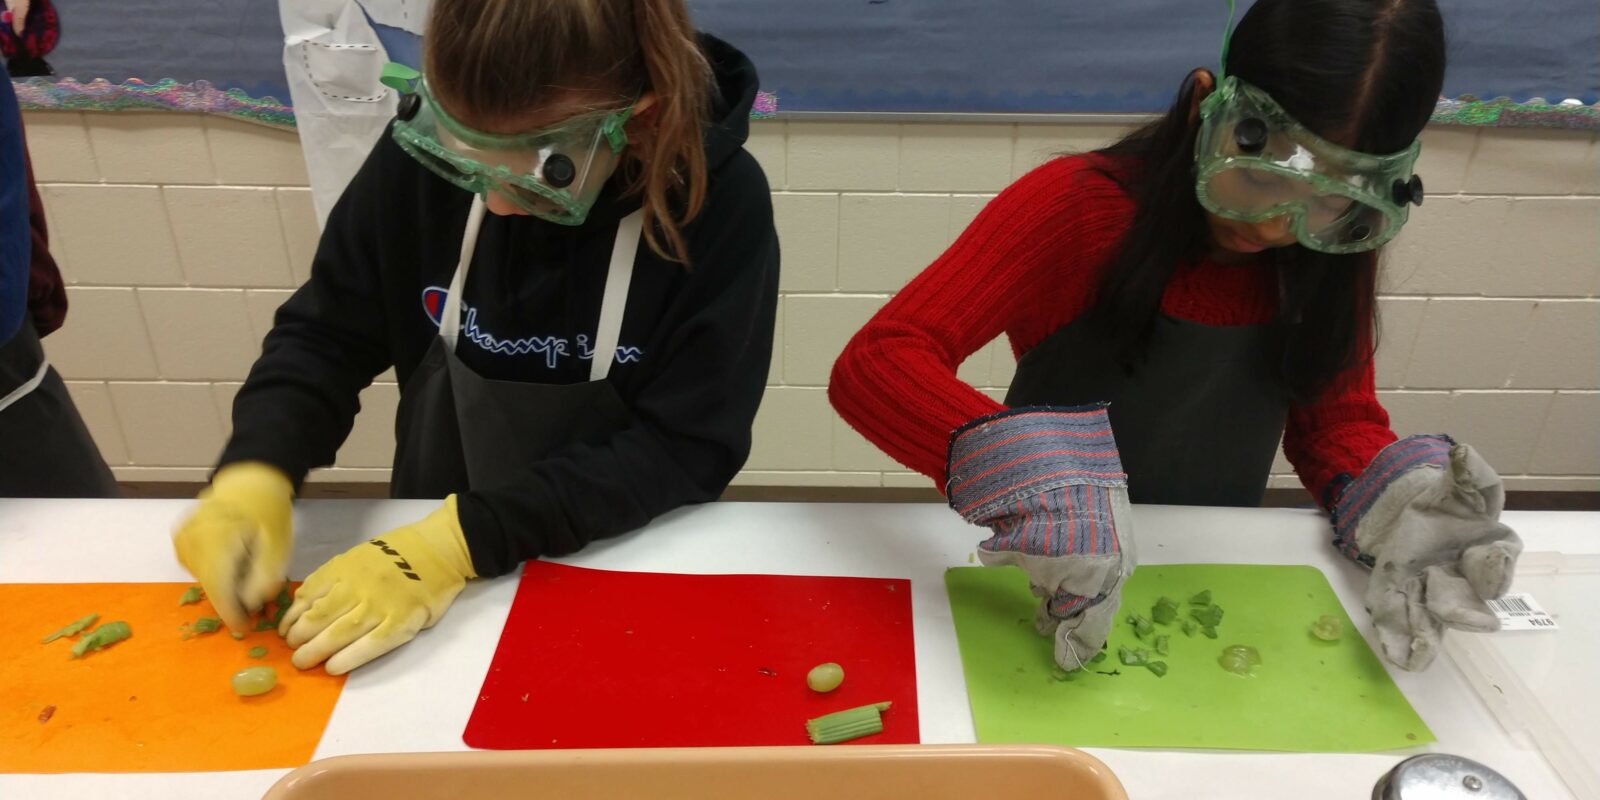 Two students wearing safety goggles and gloves use obsidian candy "stone" tools they made to slice grapes and celery on a cutting board. © SASSA